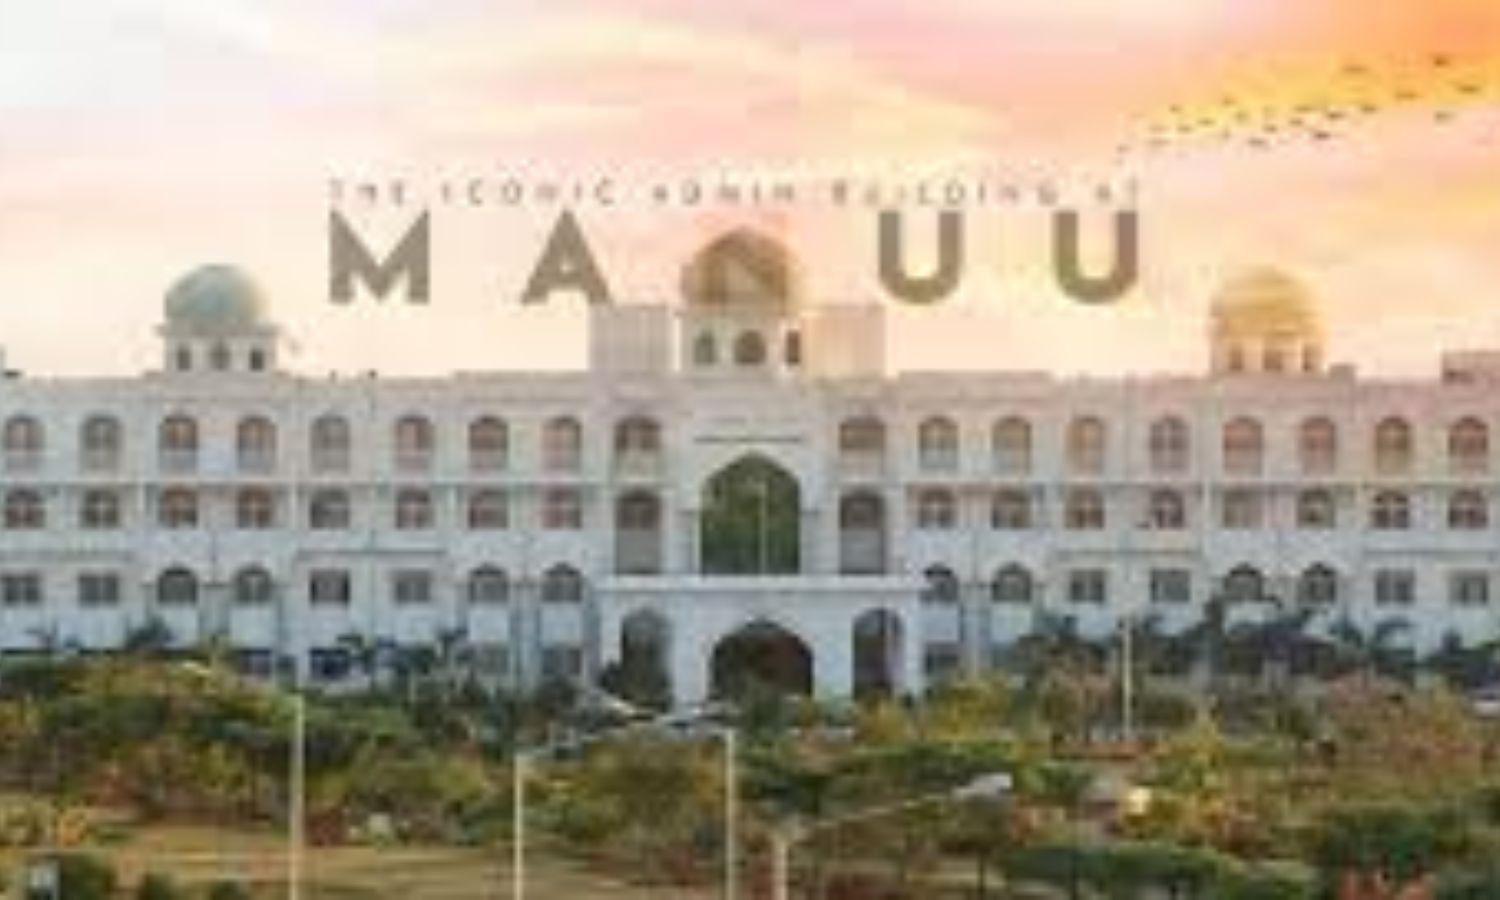 Manuu Invites Students To Apply For Admissions Into Mca M.tech B.tech Courses